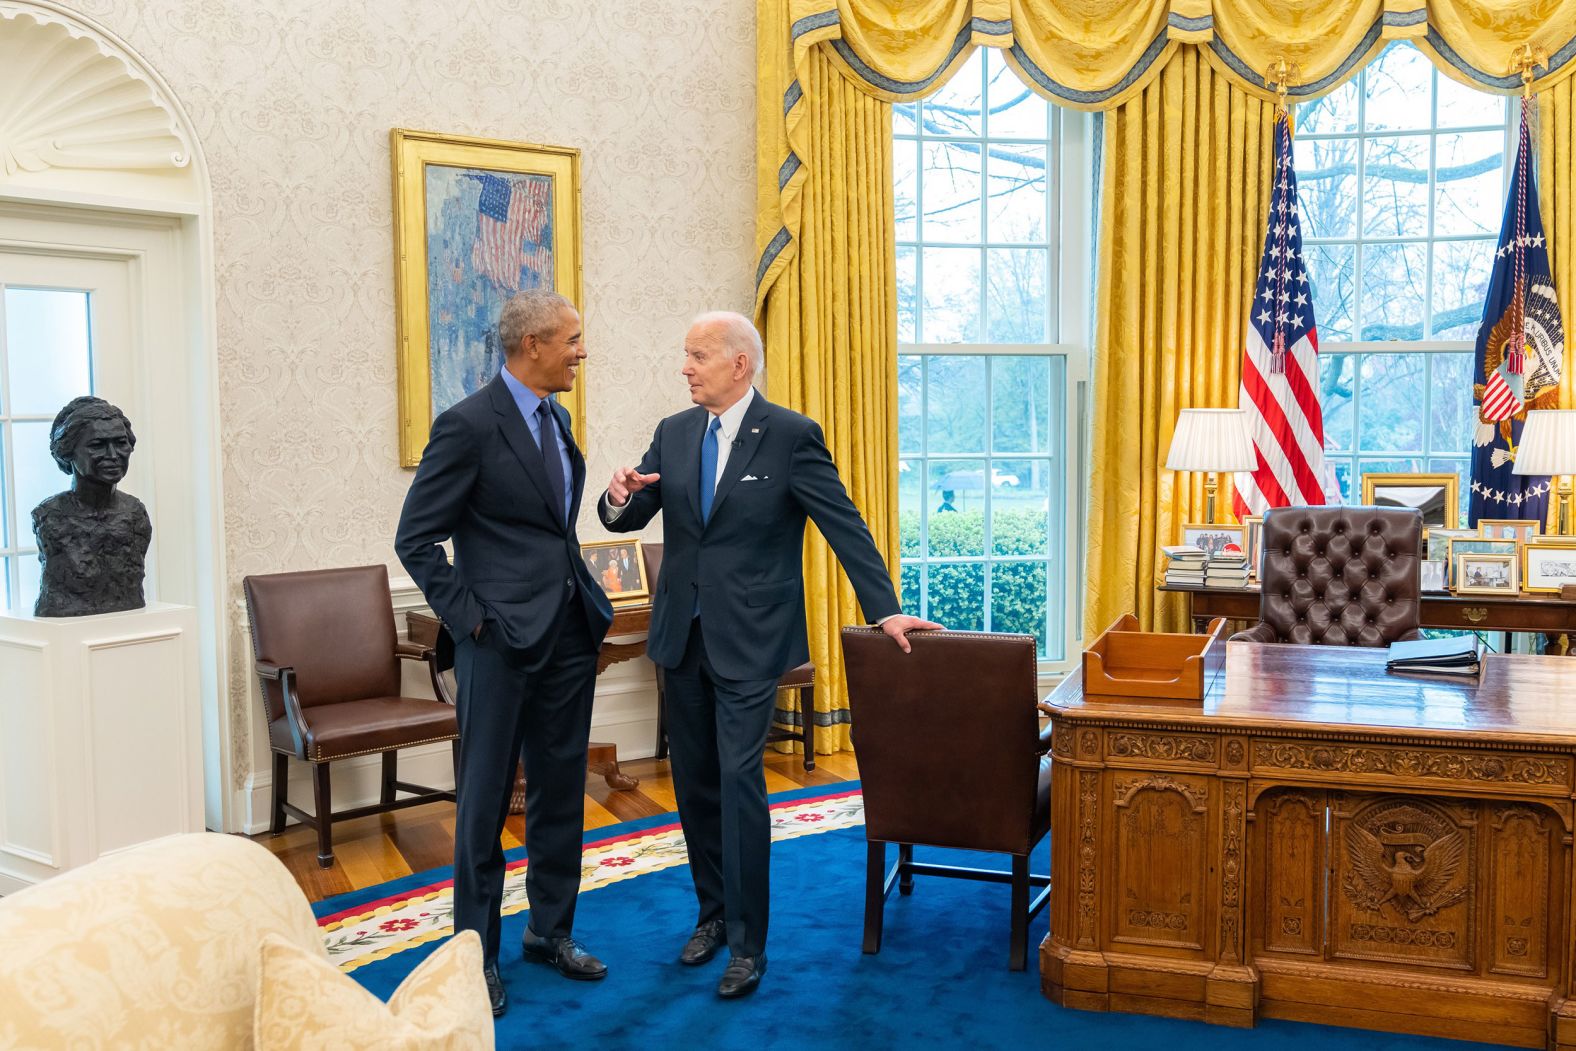 "It's an honor to welcome my friend President @BarackObama back to the White House," Biden said in an <a href="https://www.instagram.com/p/Cb-mUEPt2WB/" target="_blank" target="_blank">Instagram post</a> that showed the two men in the Oval Office on Monday. 